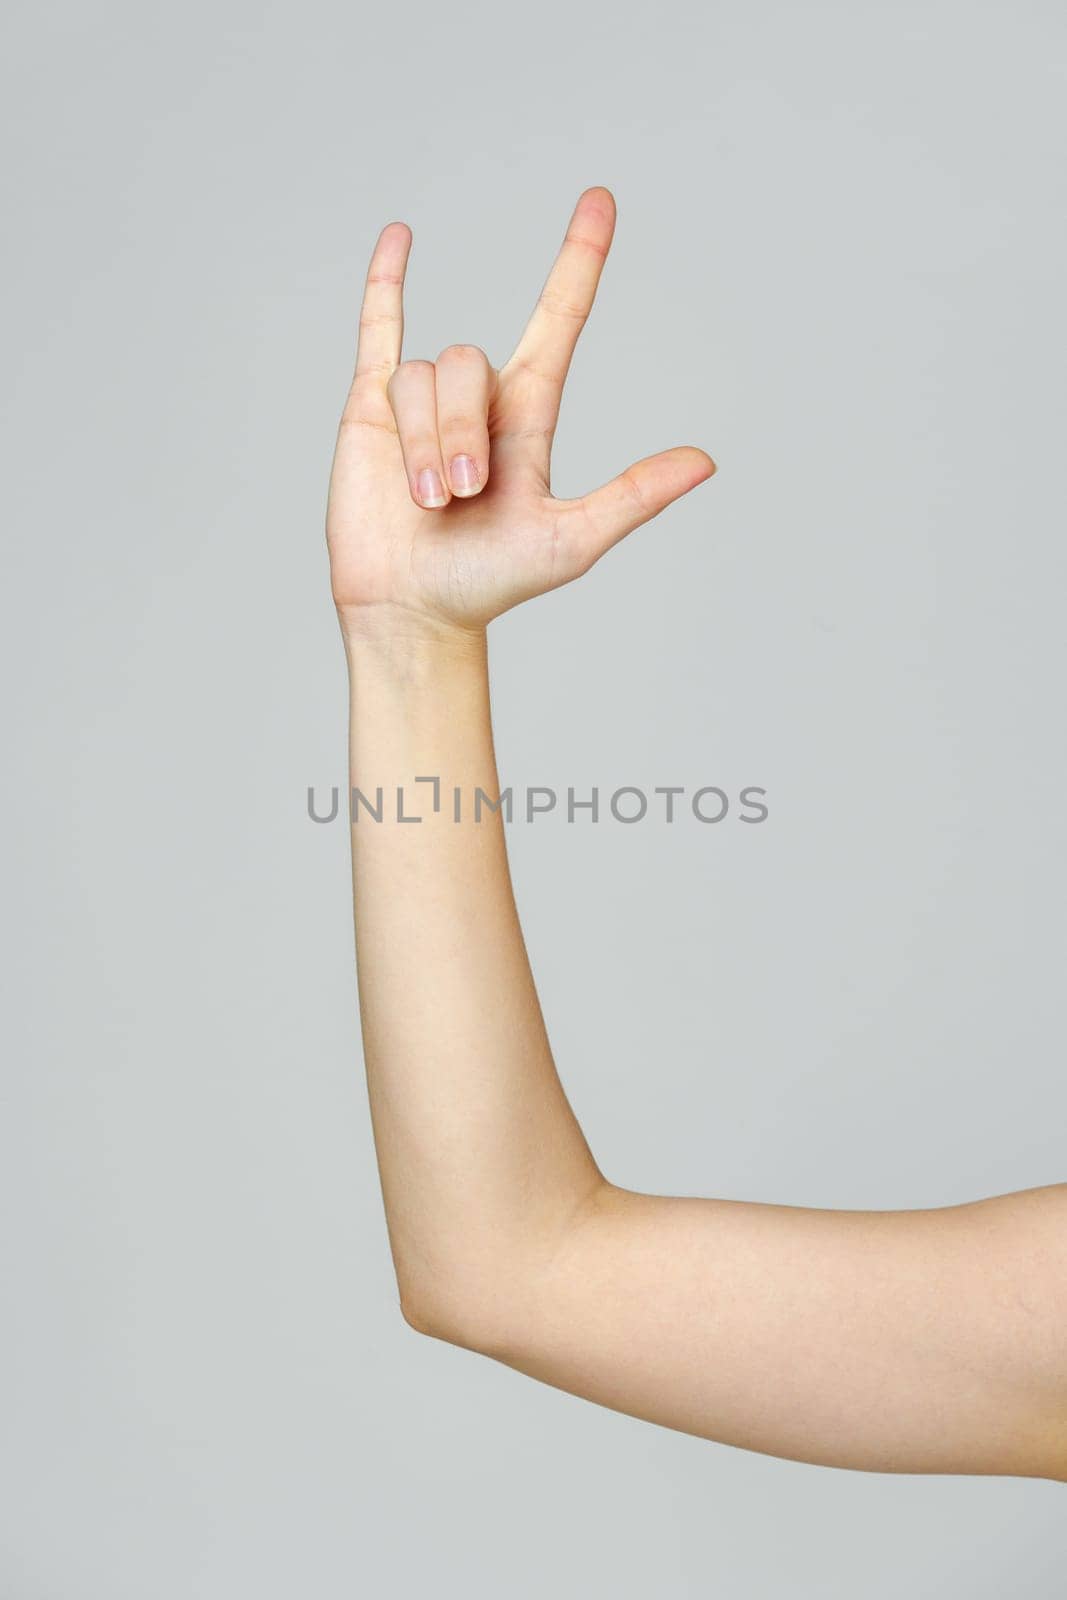 Young Woman Arm with Gesture close up on gray background